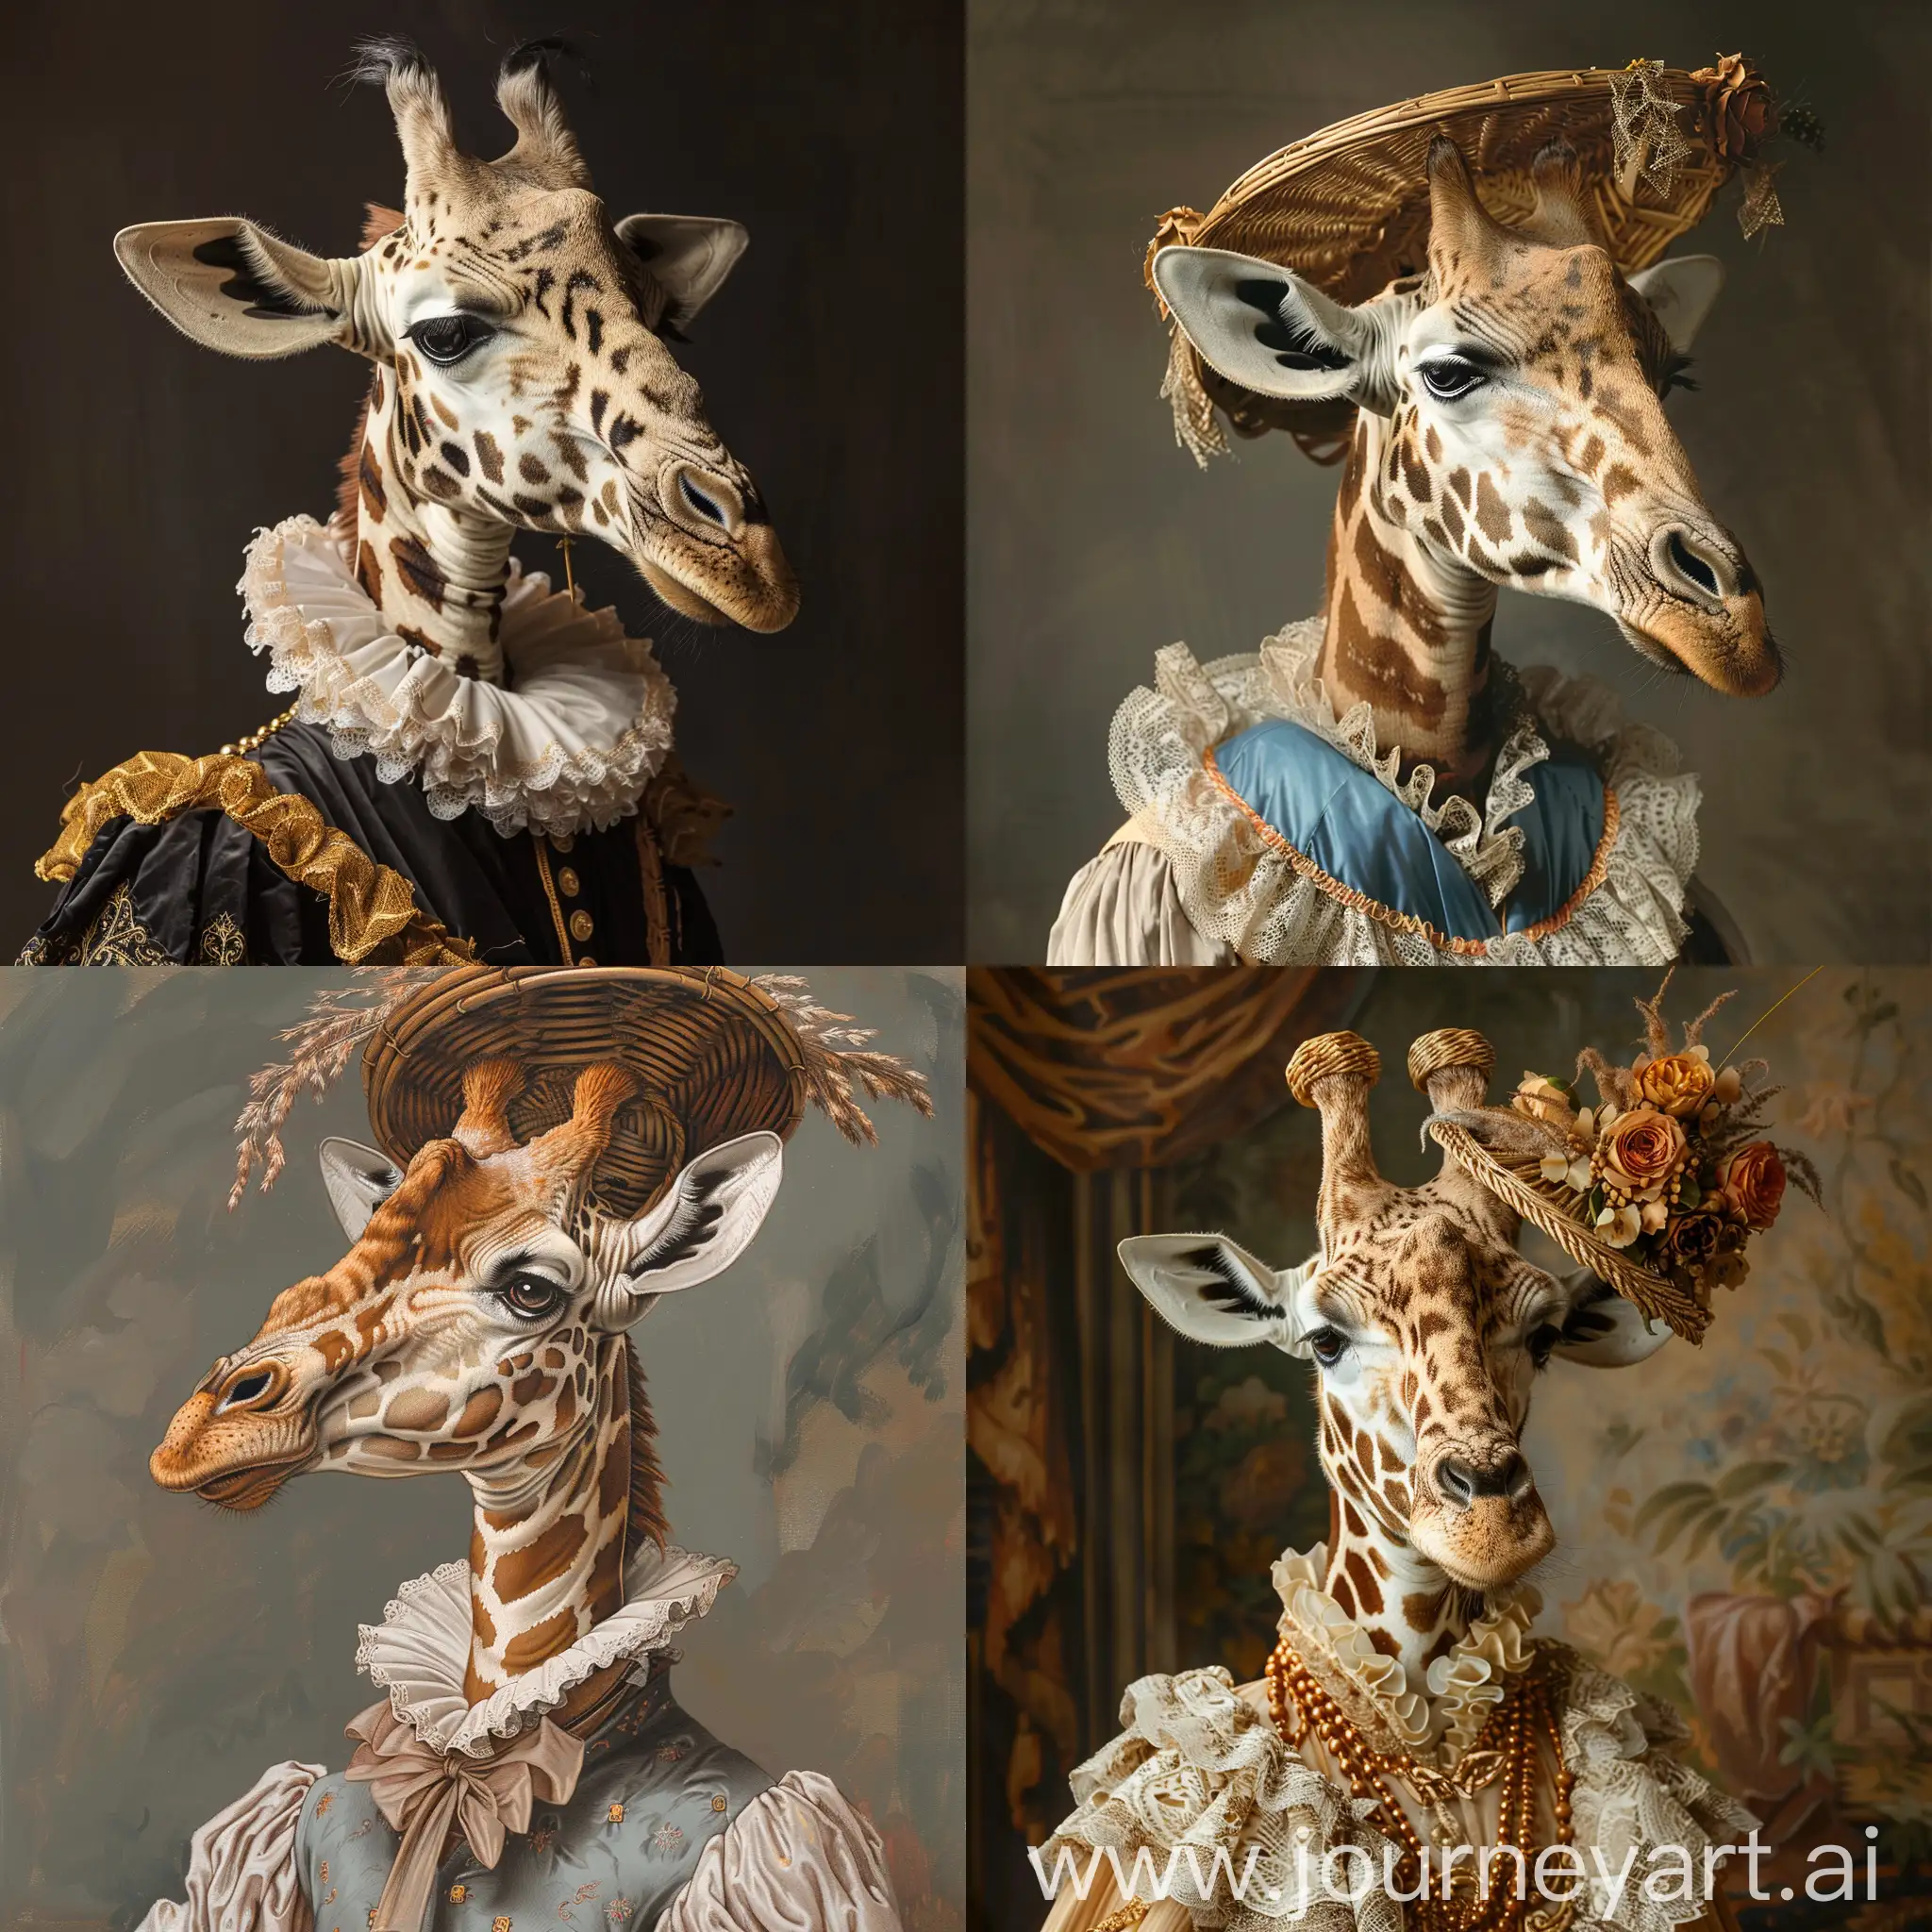 Graceful-Giraffe-in-BaroqueInspired-Costume-with-Cane-Hat